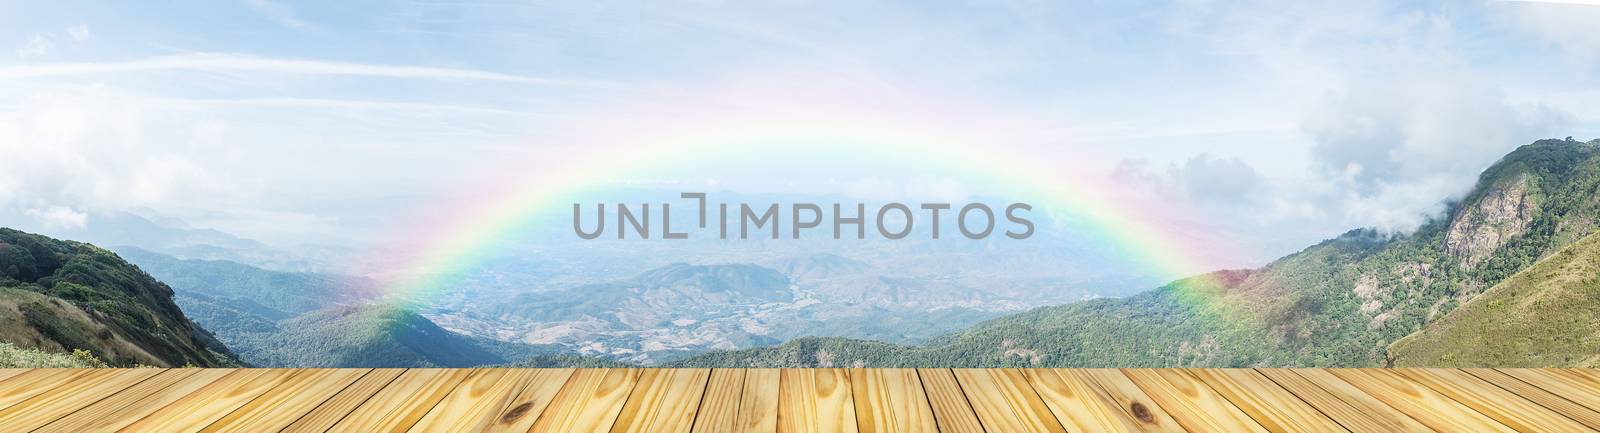 Empty wooden table top and blurred view of rainbow at lanscape m by rakoptonLPN